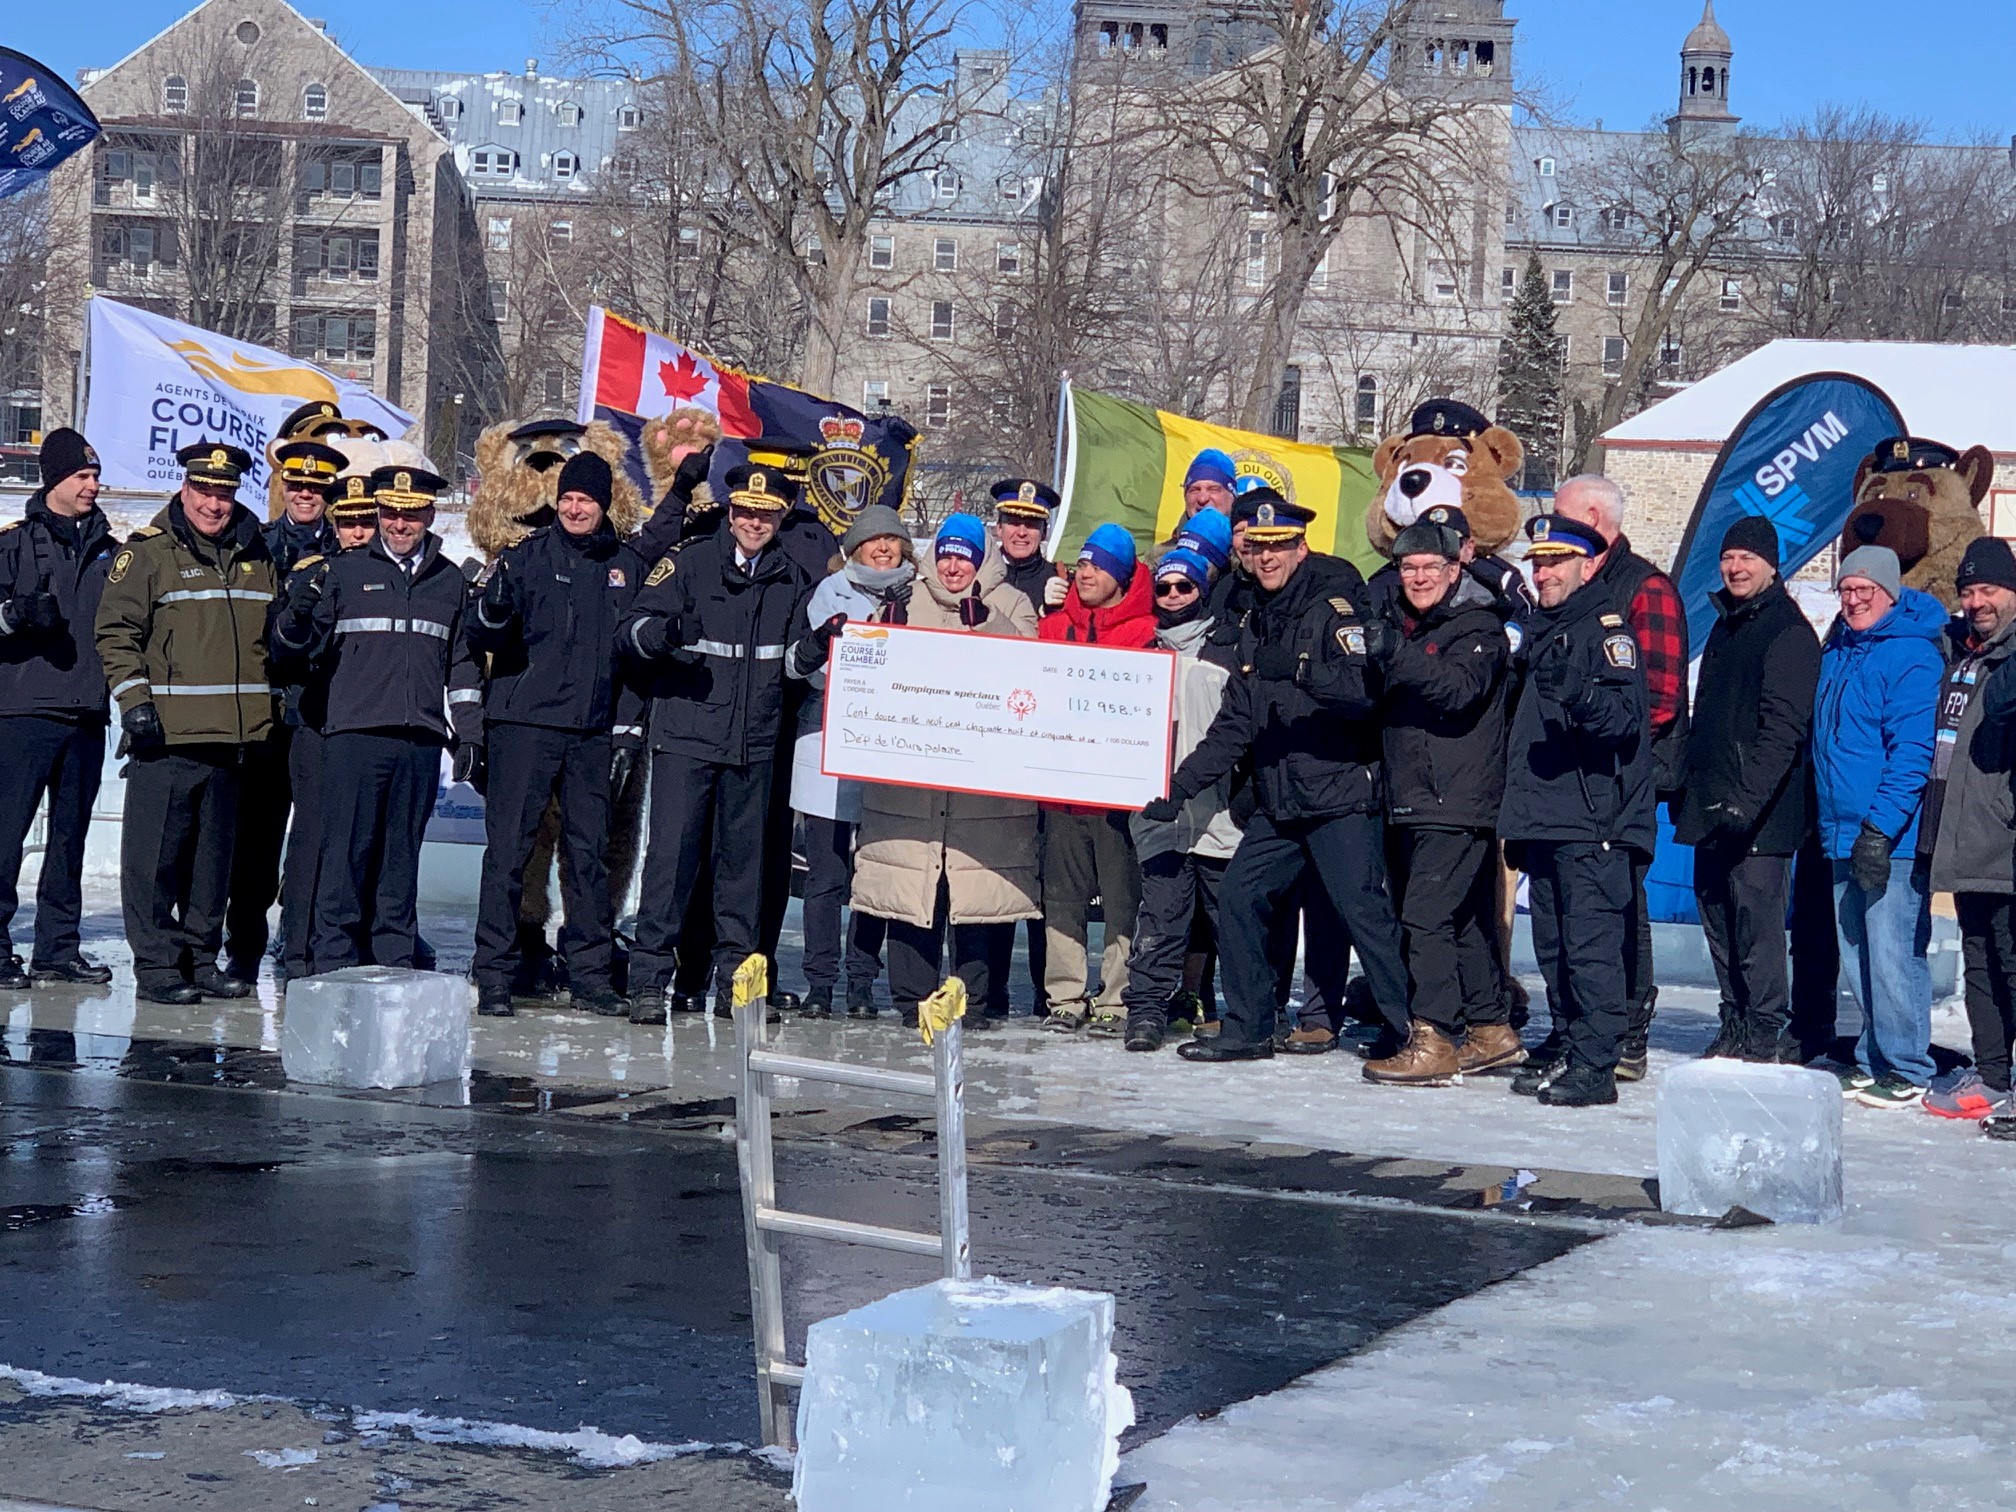 Montreal’s Polar Bear challenge raises over $100,000 for Special Olympics